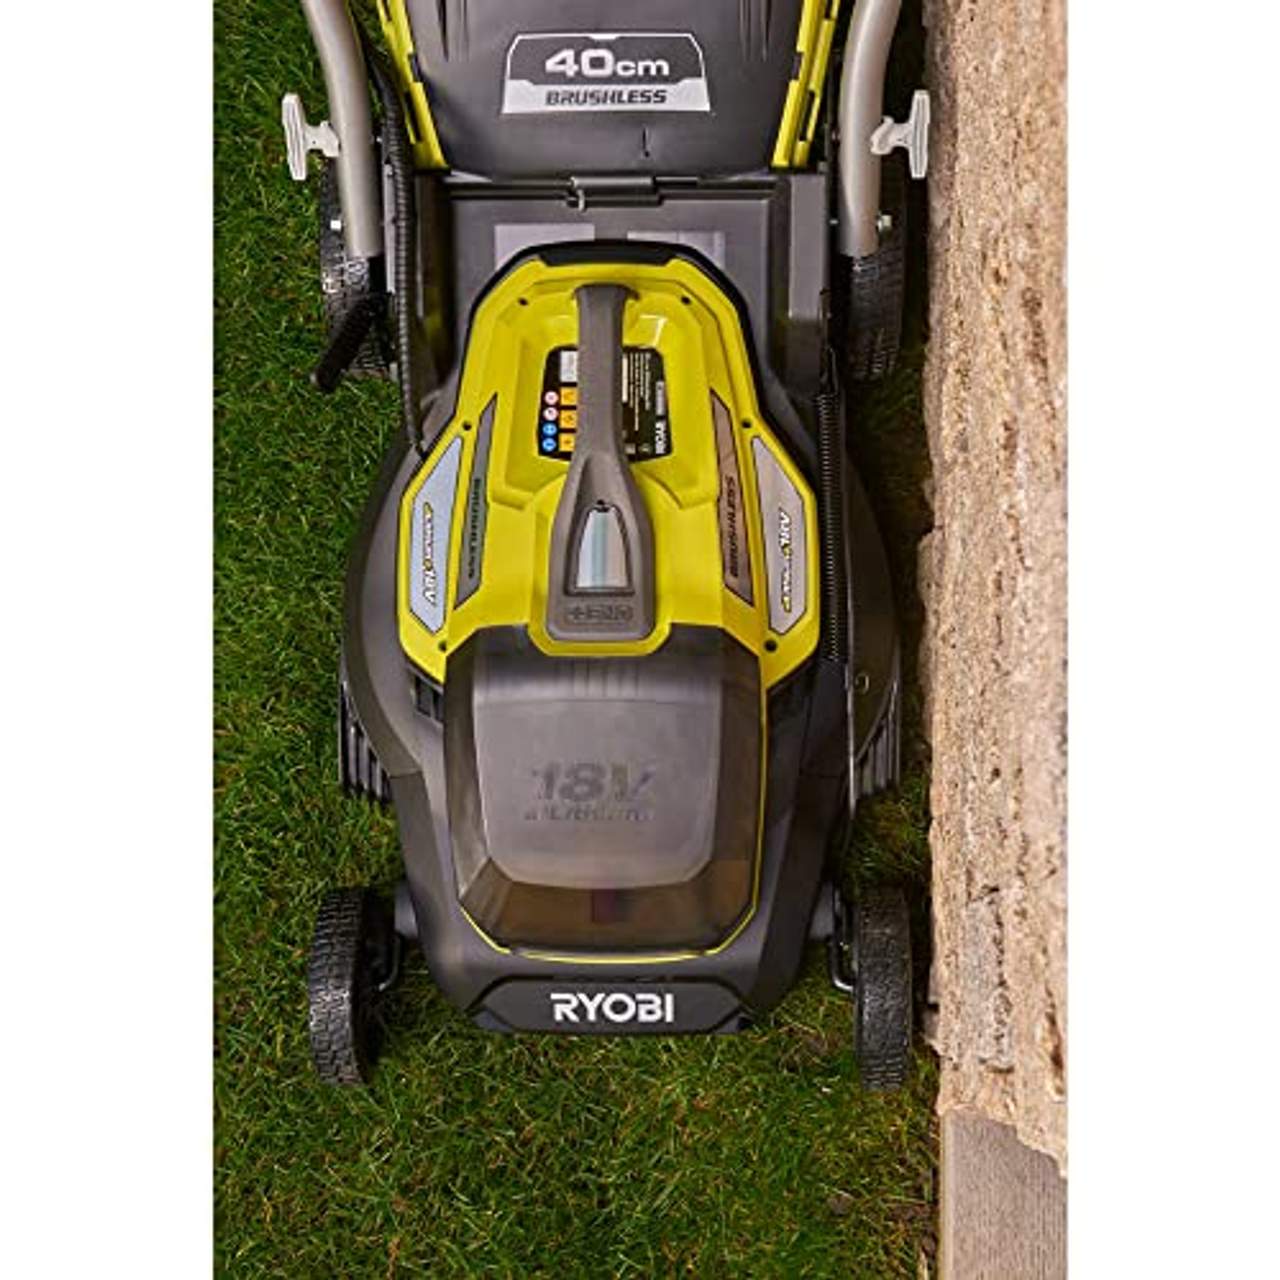 Ryobi RY18LMX40A-240 18V Cordless Lawnmower with 2 Batteries and Charger 40 cm Cutting Width